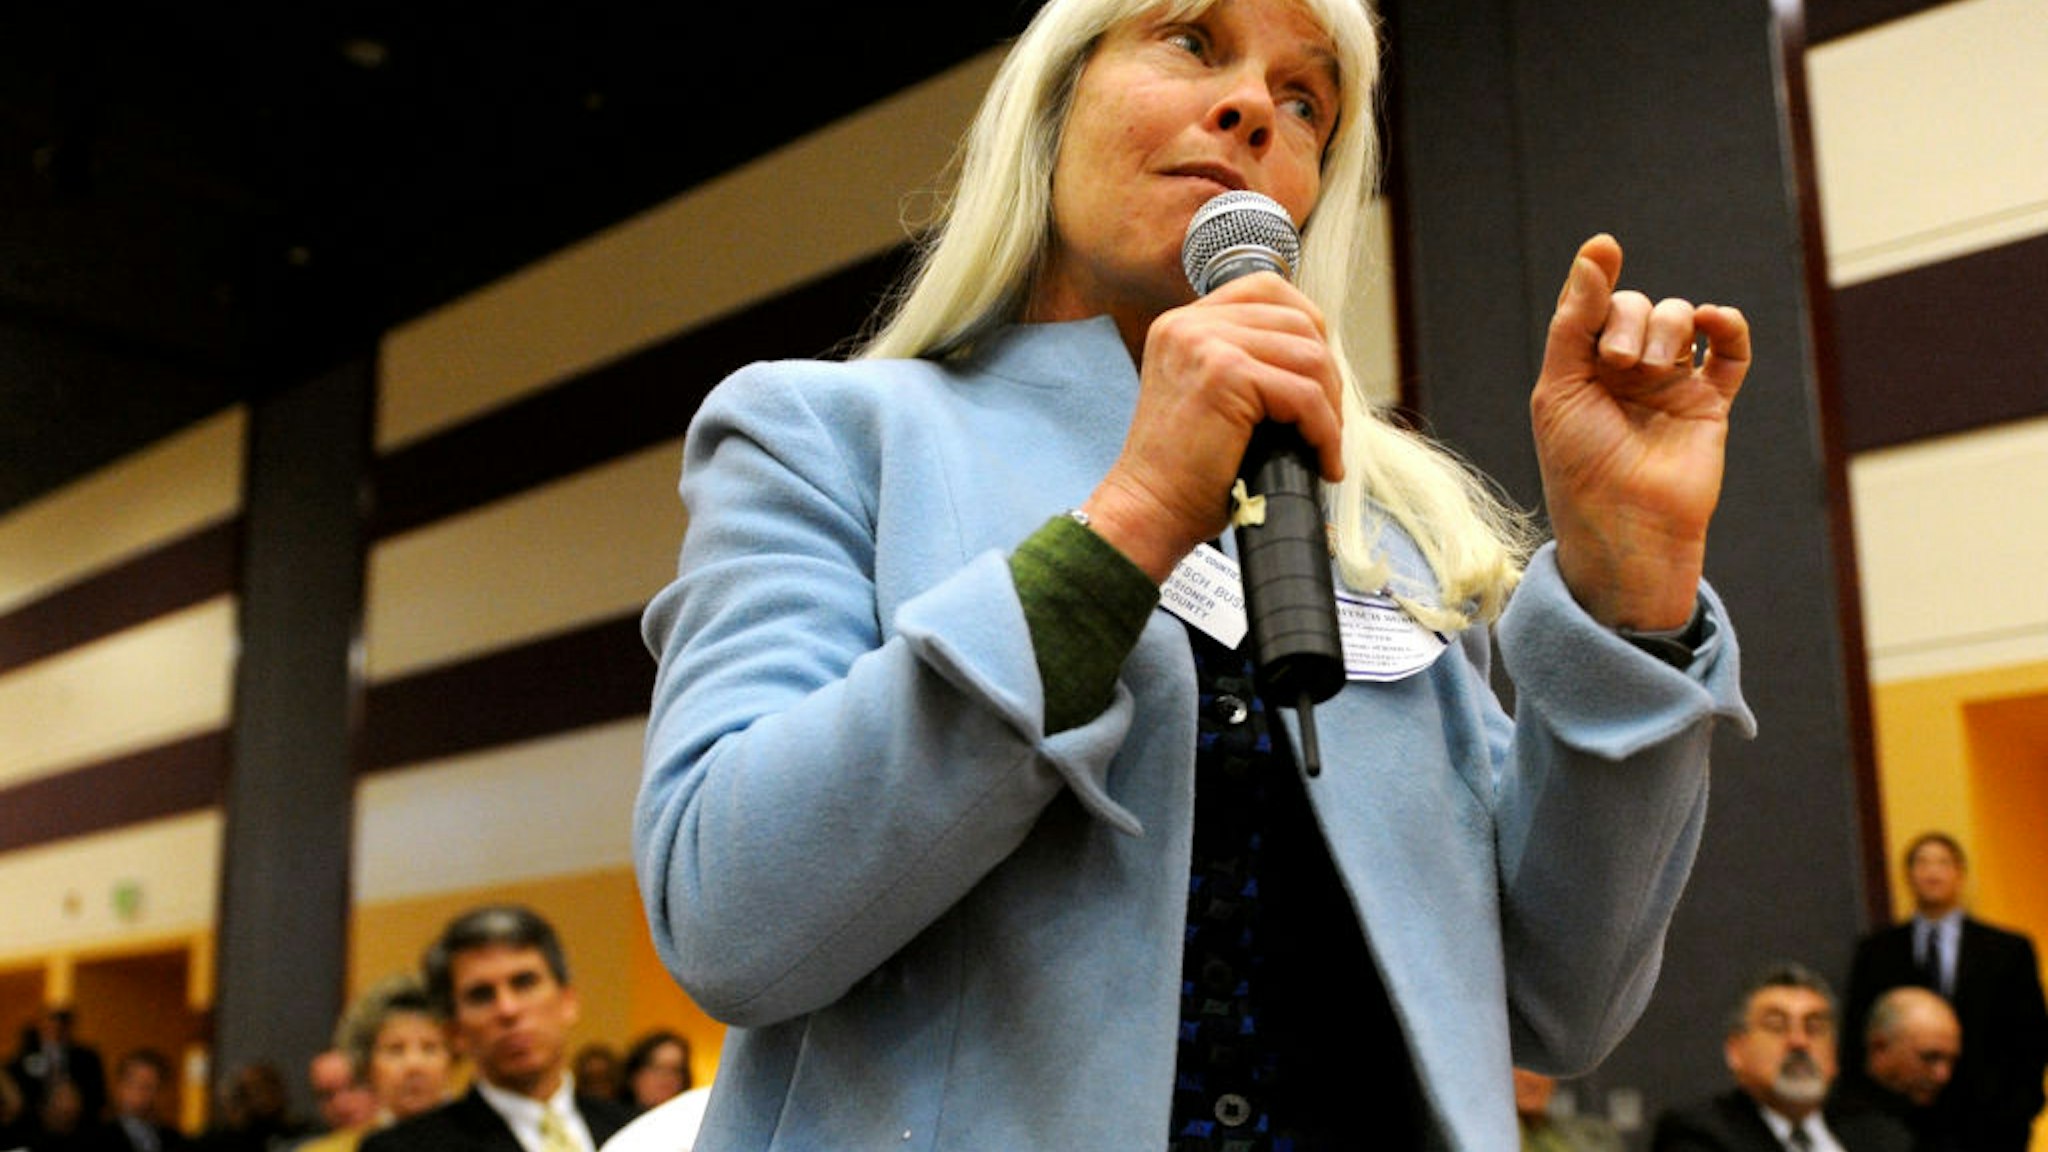 Routt County Commissioner Diane Mitsch Bush asks a question of keynote speaker U.S. Transportation Secretary Ray LaHood during the Q&A portion of the "Putting Colorado to Work" jobs forum at the University of Denver.